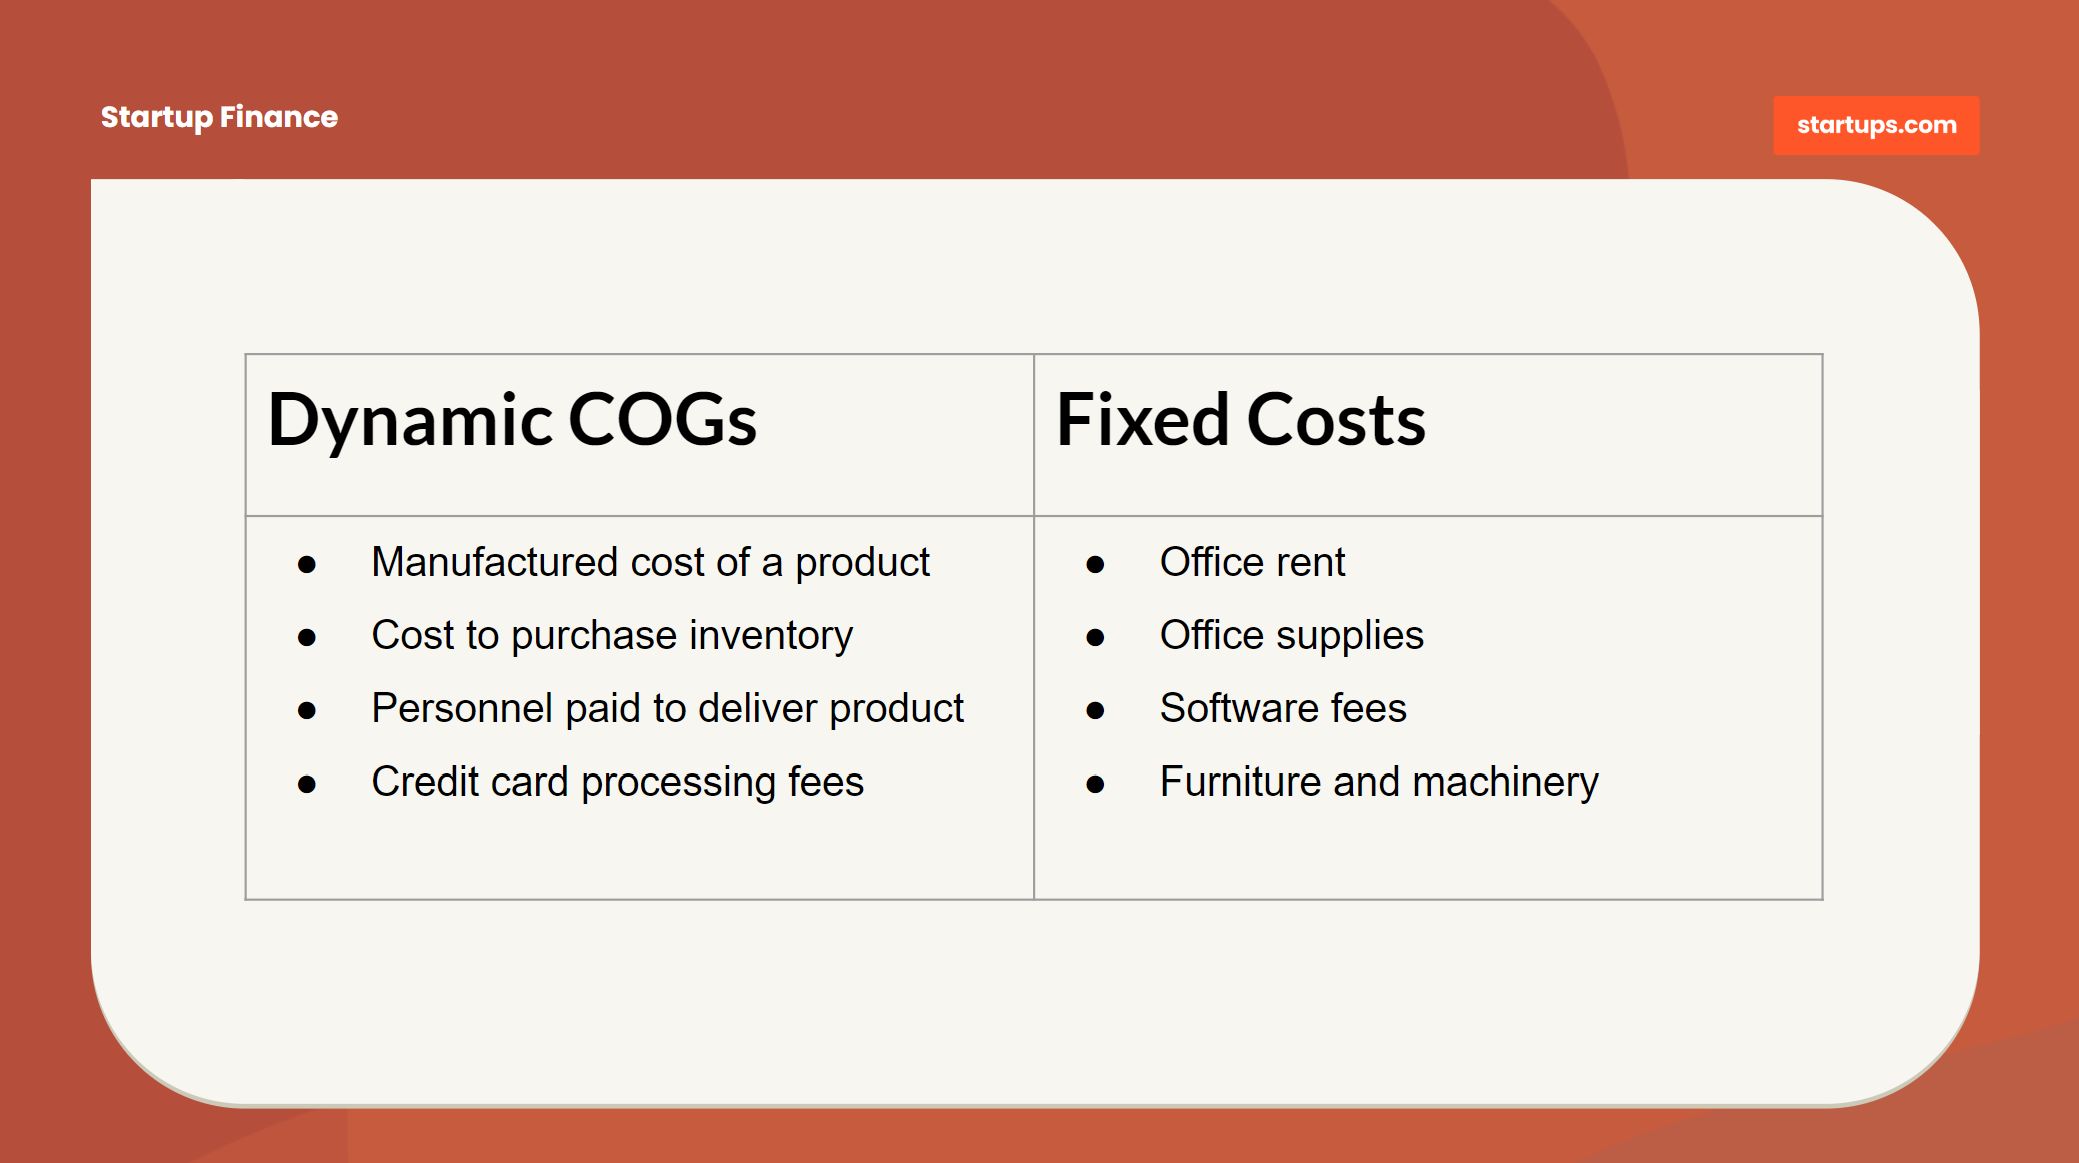 COGS excludes indirect costs like office supplies or in some cases ending inventory or distribution costs.